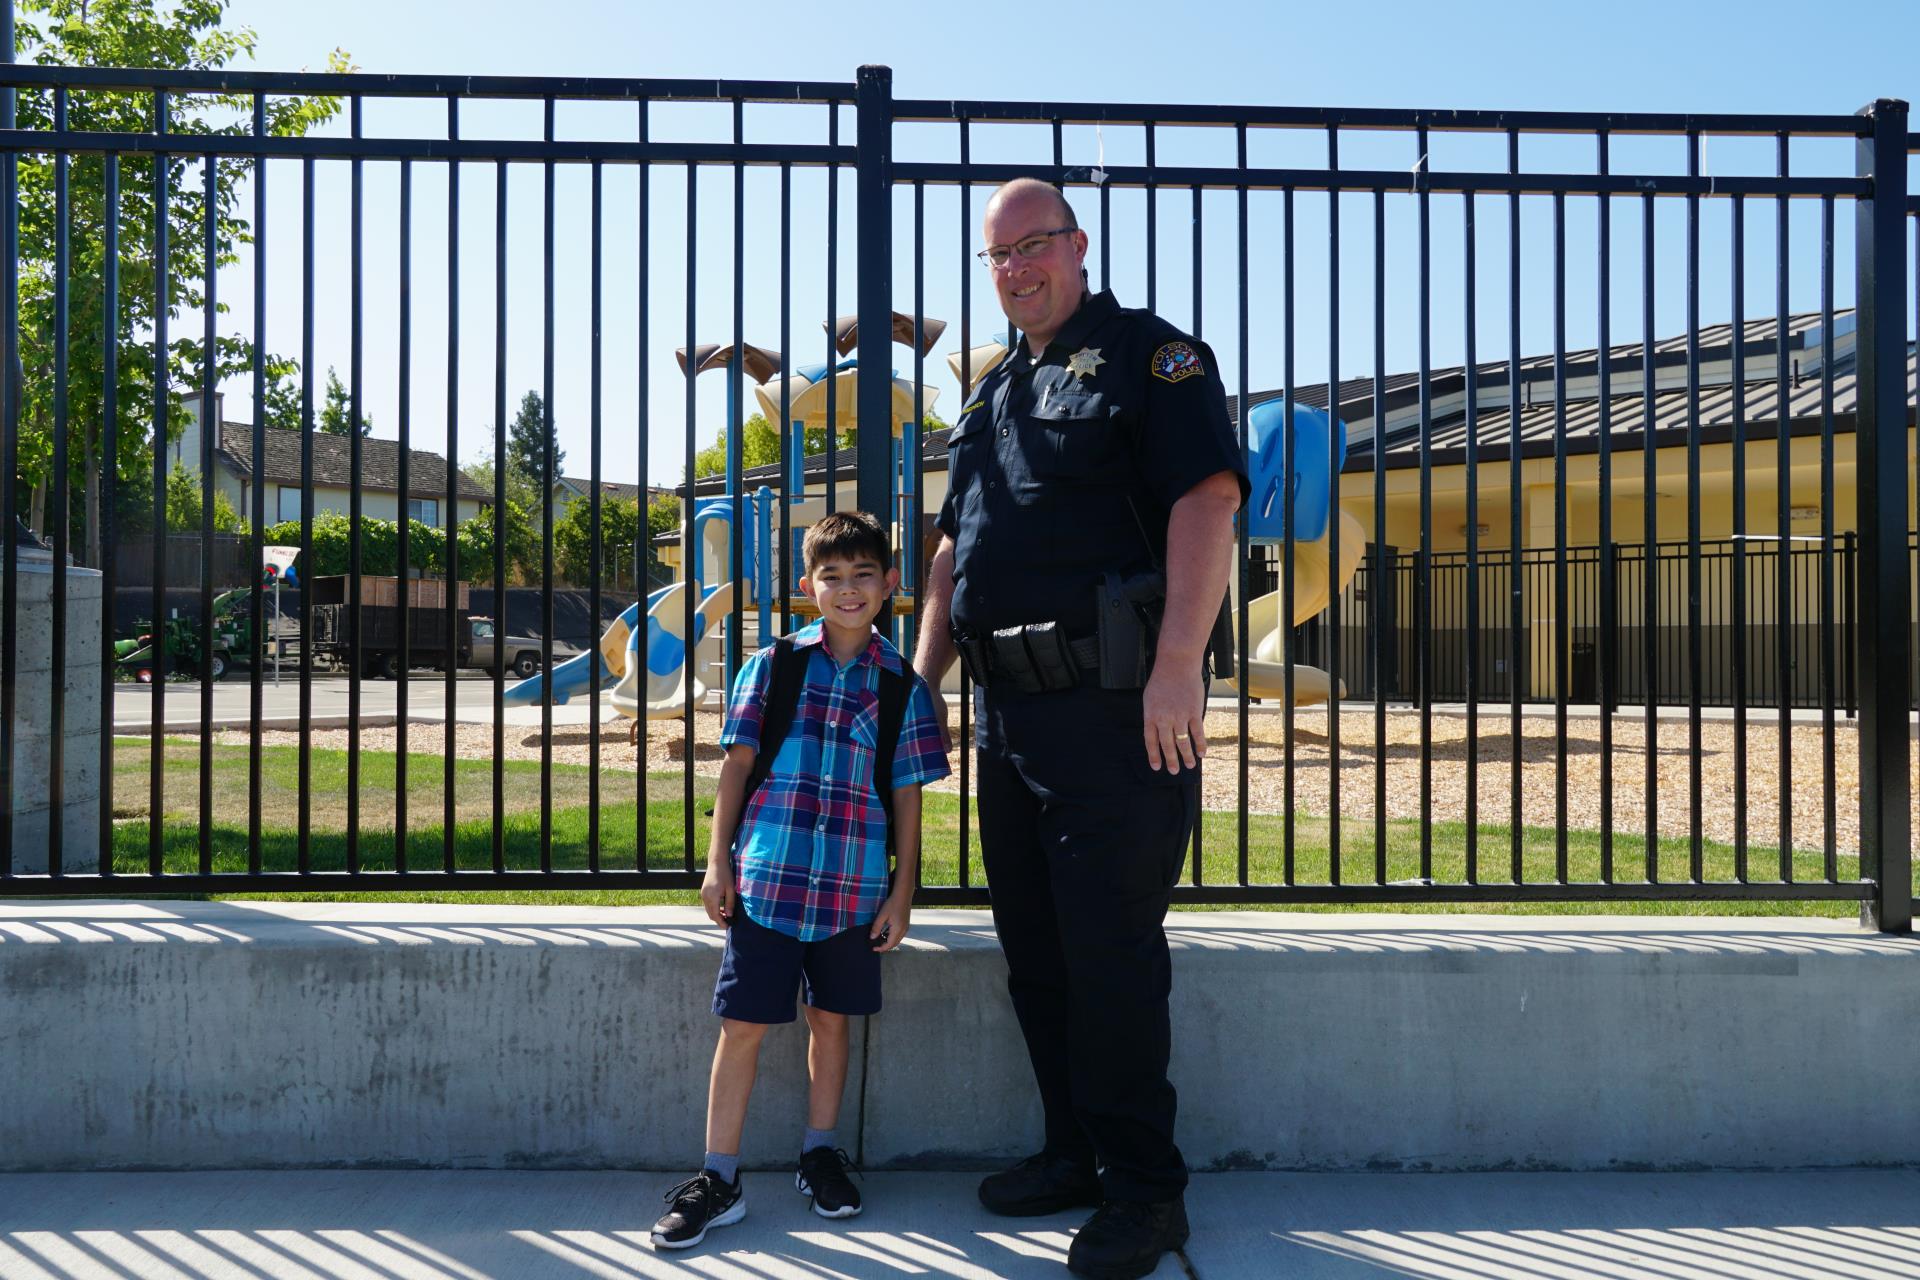 Officer with boy in front of school